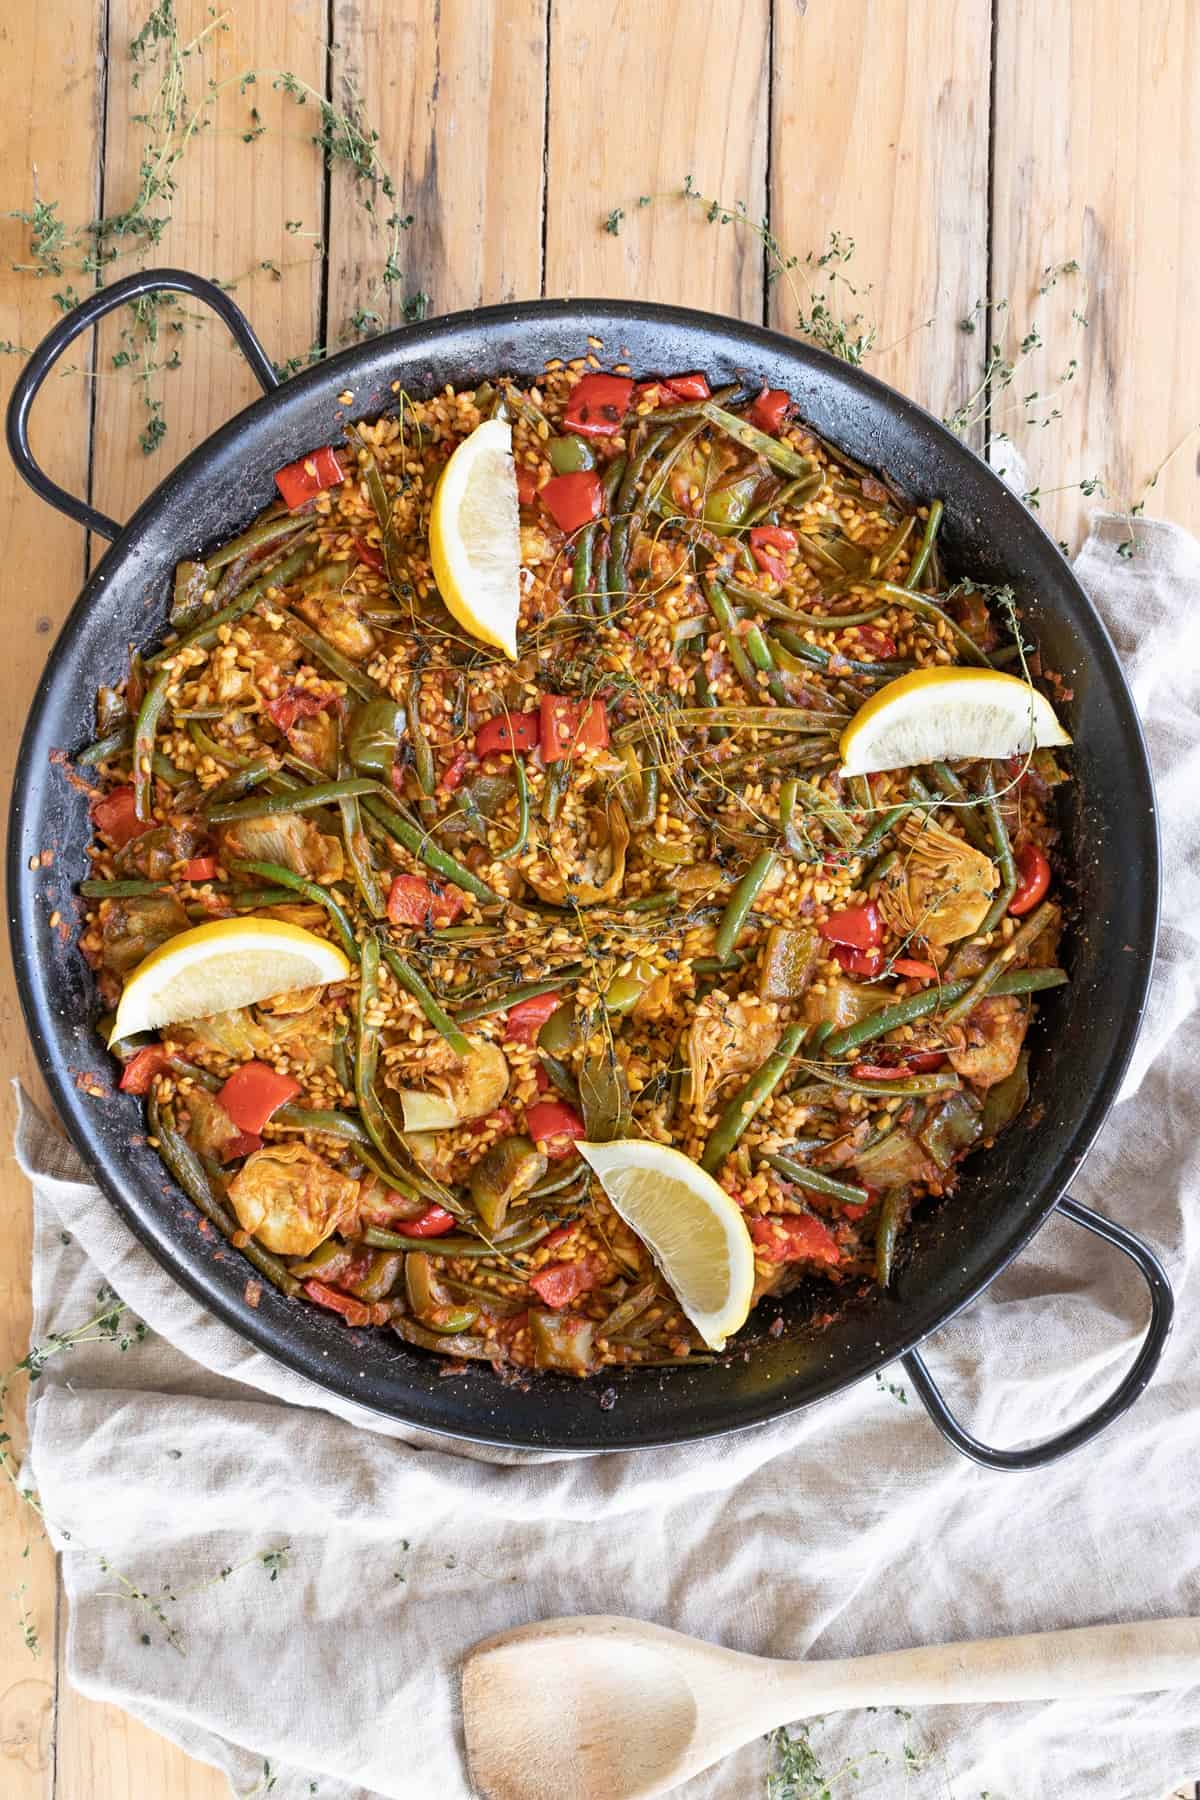 Authentic vegetable paella with lemon wedges